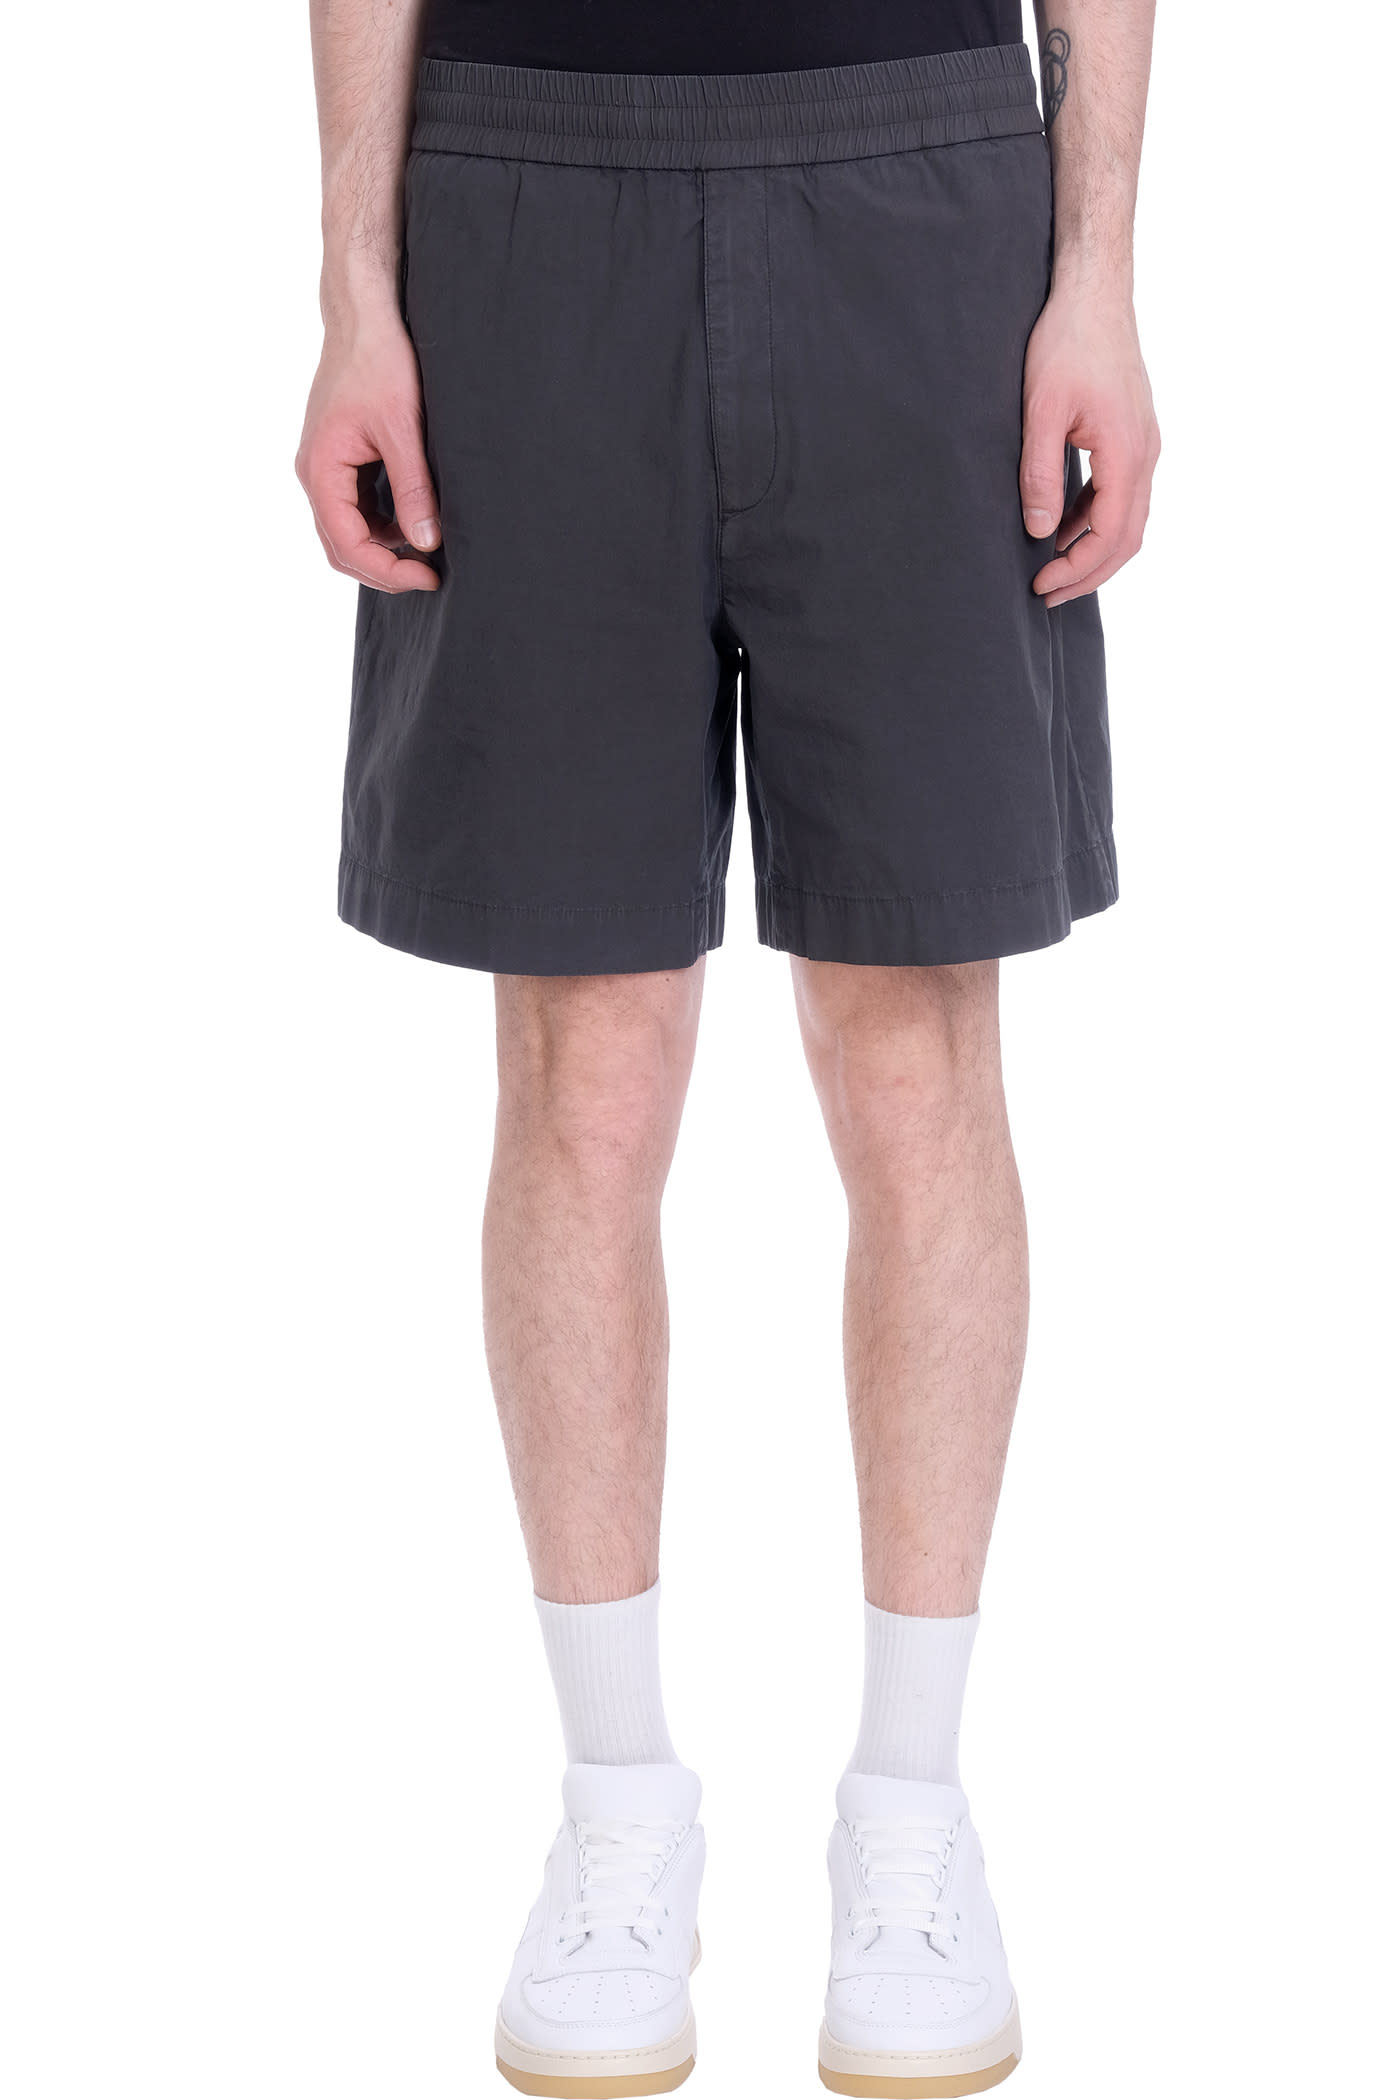 ACNE STUDIOS RANDAL GD SHORTS IN GREY COTTON,BE0058AA2